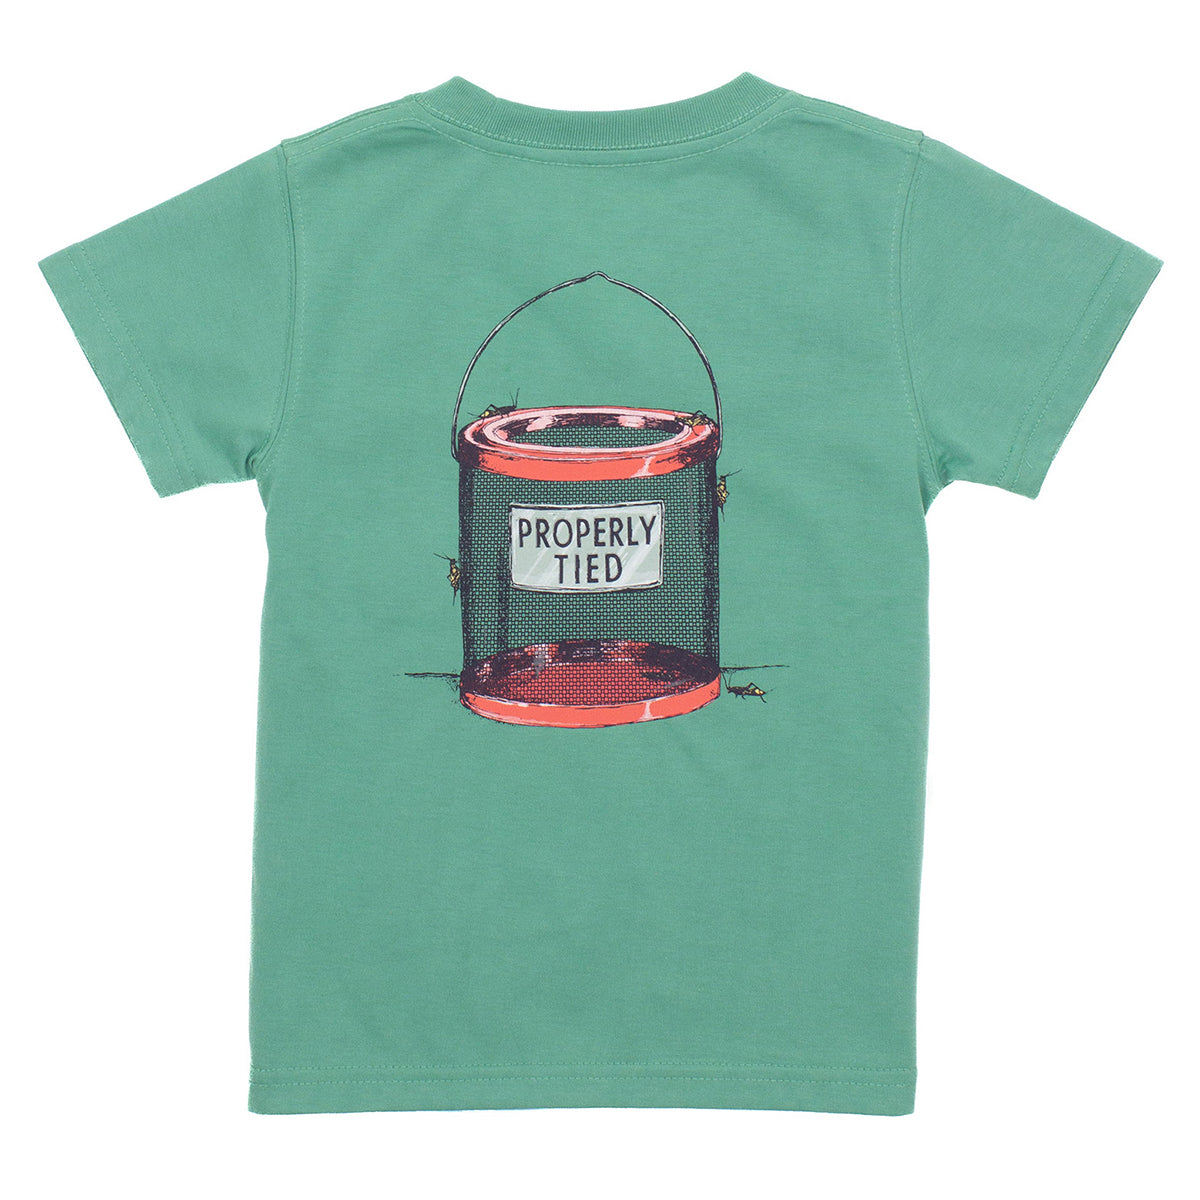 Properly Tied Toddler Boy's Live Crickets on Ivy Green Logo T-Shirt